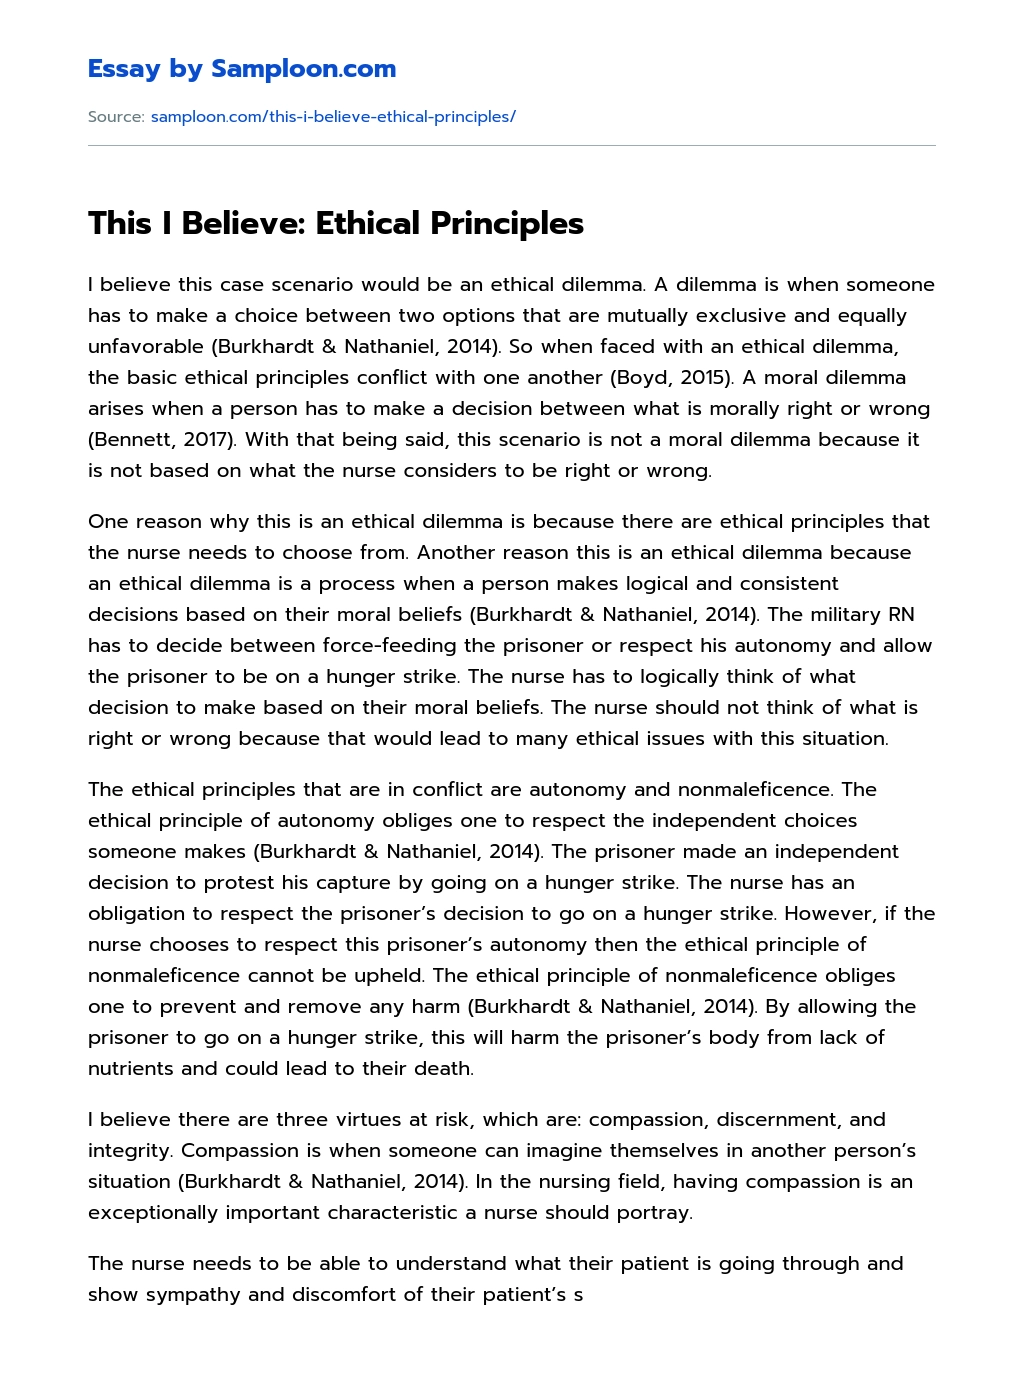 This I Believe: Ethical Principles essay